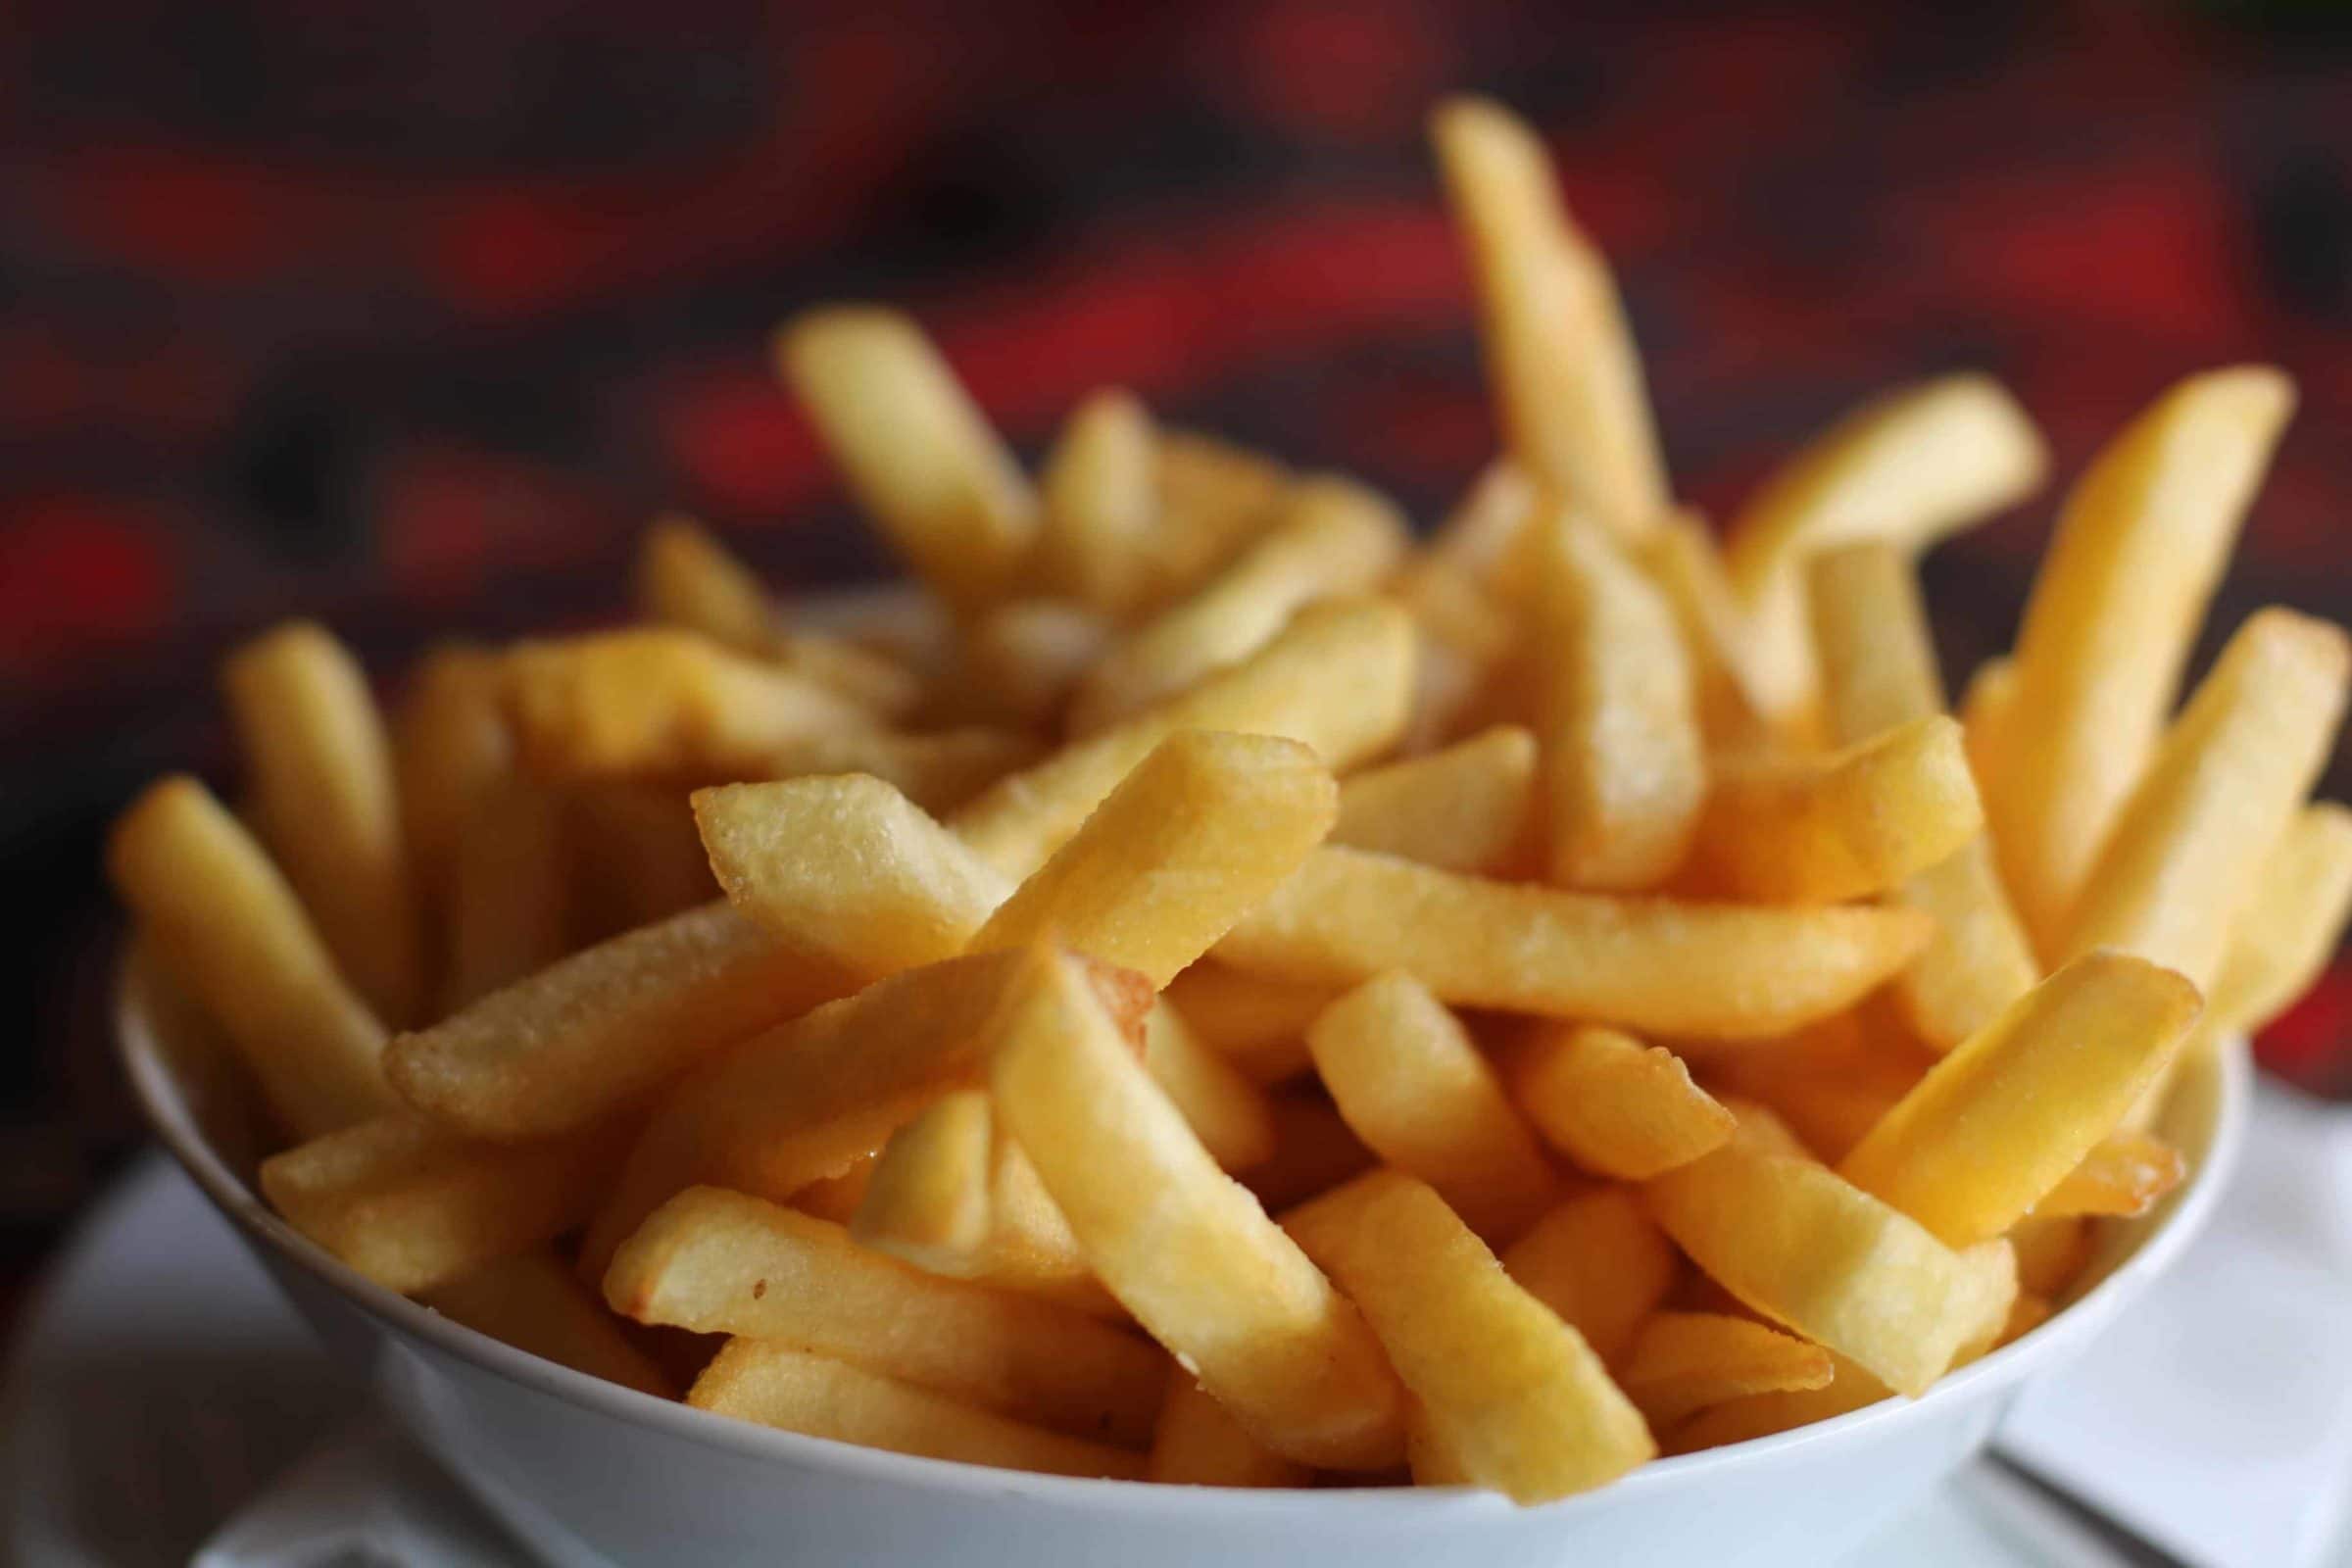 100 Orders of Fries Later: What Your Customers Care About the Most